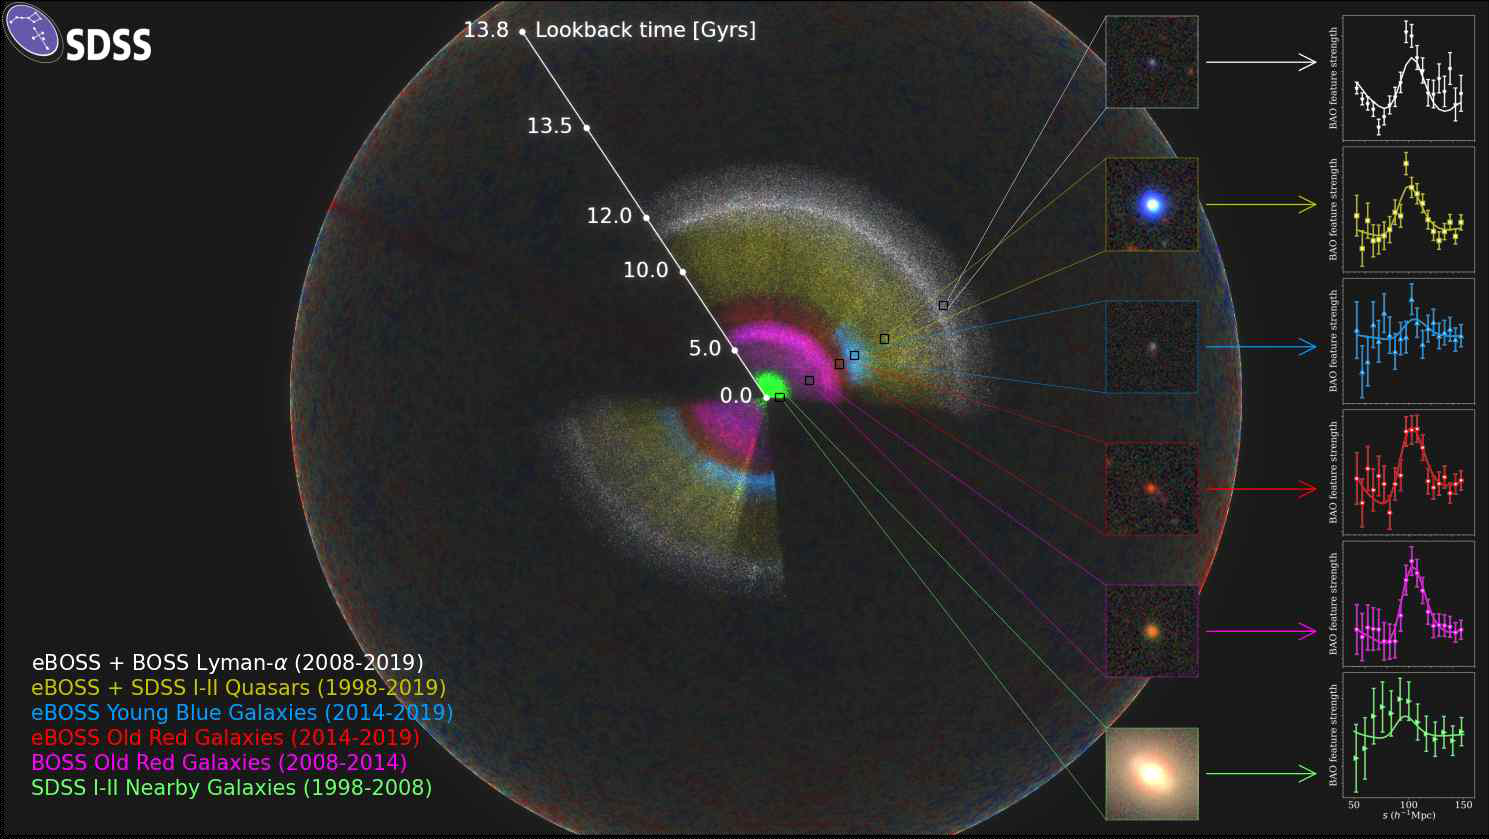 The SDSS map is shown as a rainbow of colors, located within the observable Universe (the outer sphere, showing fluctuations in the CMB). We are located at the center of this map. The inset for each color-coded section of the map includes an image of a typical galaxy or quasar from that section, and also the signal of the pattern that the eBOSS team measures there. As we look out in distance, we look back in time. So, the location of these signals reveals the expansion rate of the Universe at different times in cosmic history. Image credit: Anand Raichoor (EPFL), Ashley Ross (OSU), and the SDSS Collaboration